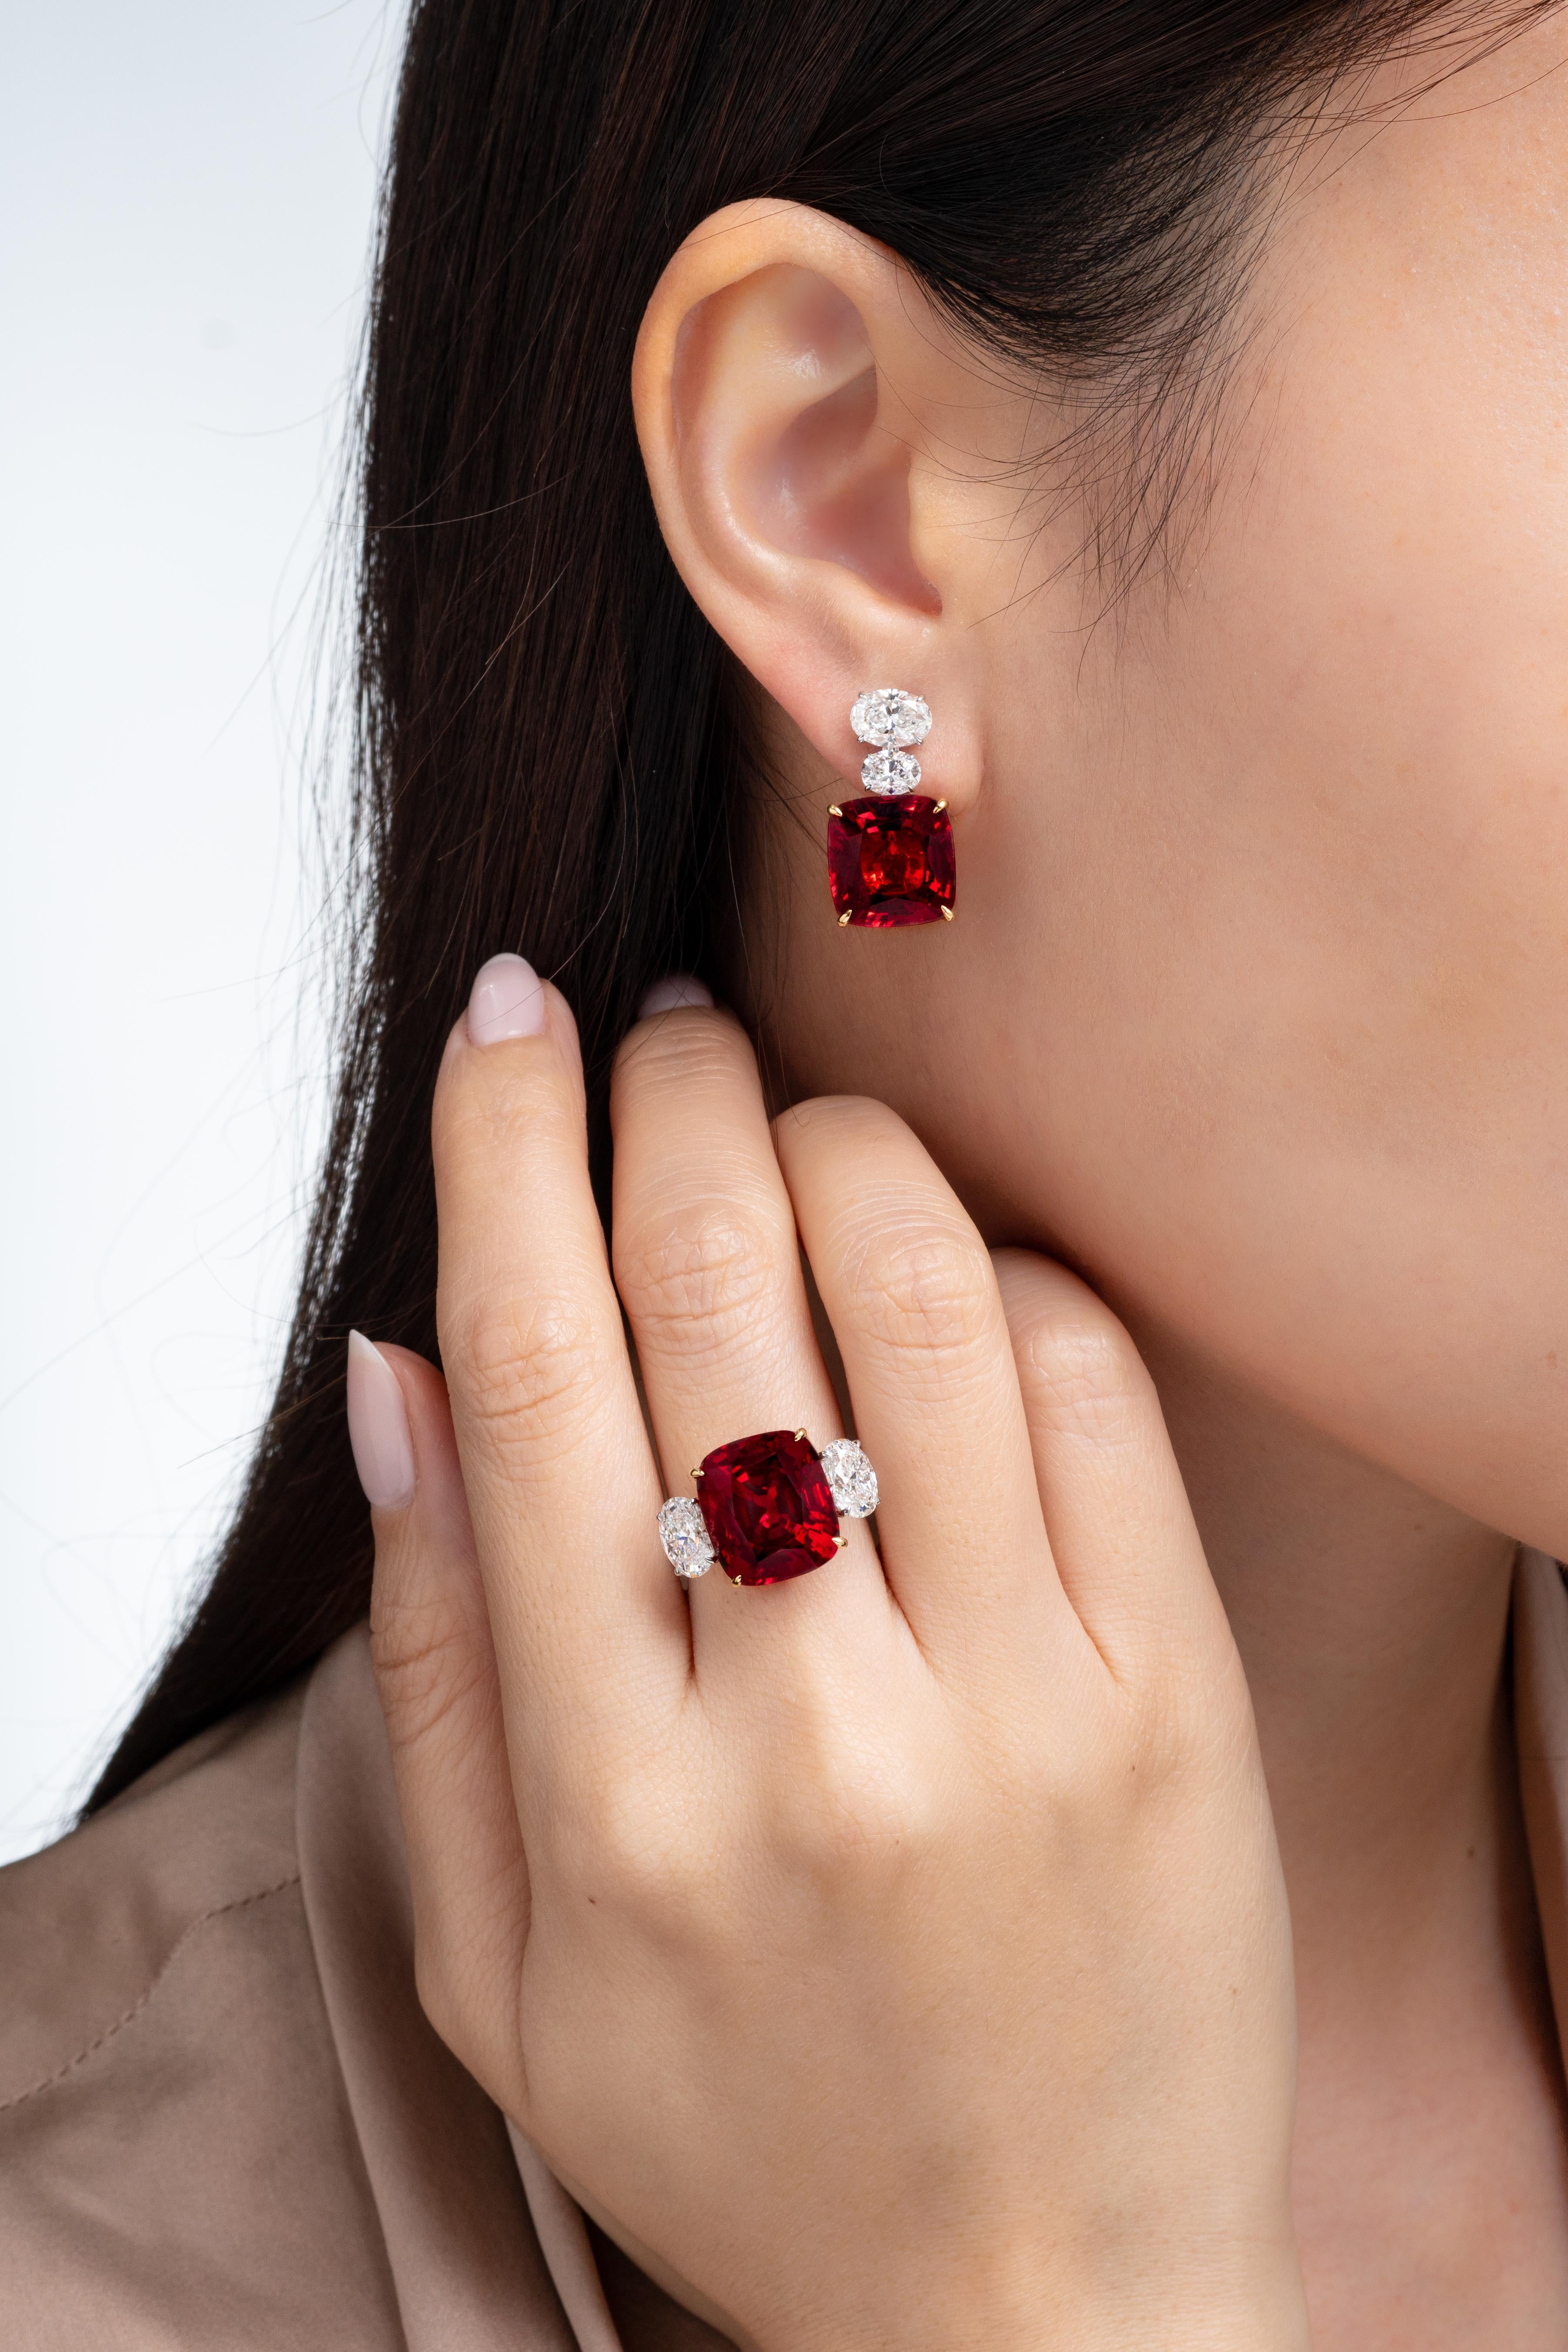 Vihari Jewels created this gorgeous pair of 18.03 carat cushion cut No Heat Burmese Spinel Earrings. The earrings possess the most vibrant red hue and are paired back with a unique 18K Yellow Gold casing featuring an additional 0.43 carats of white